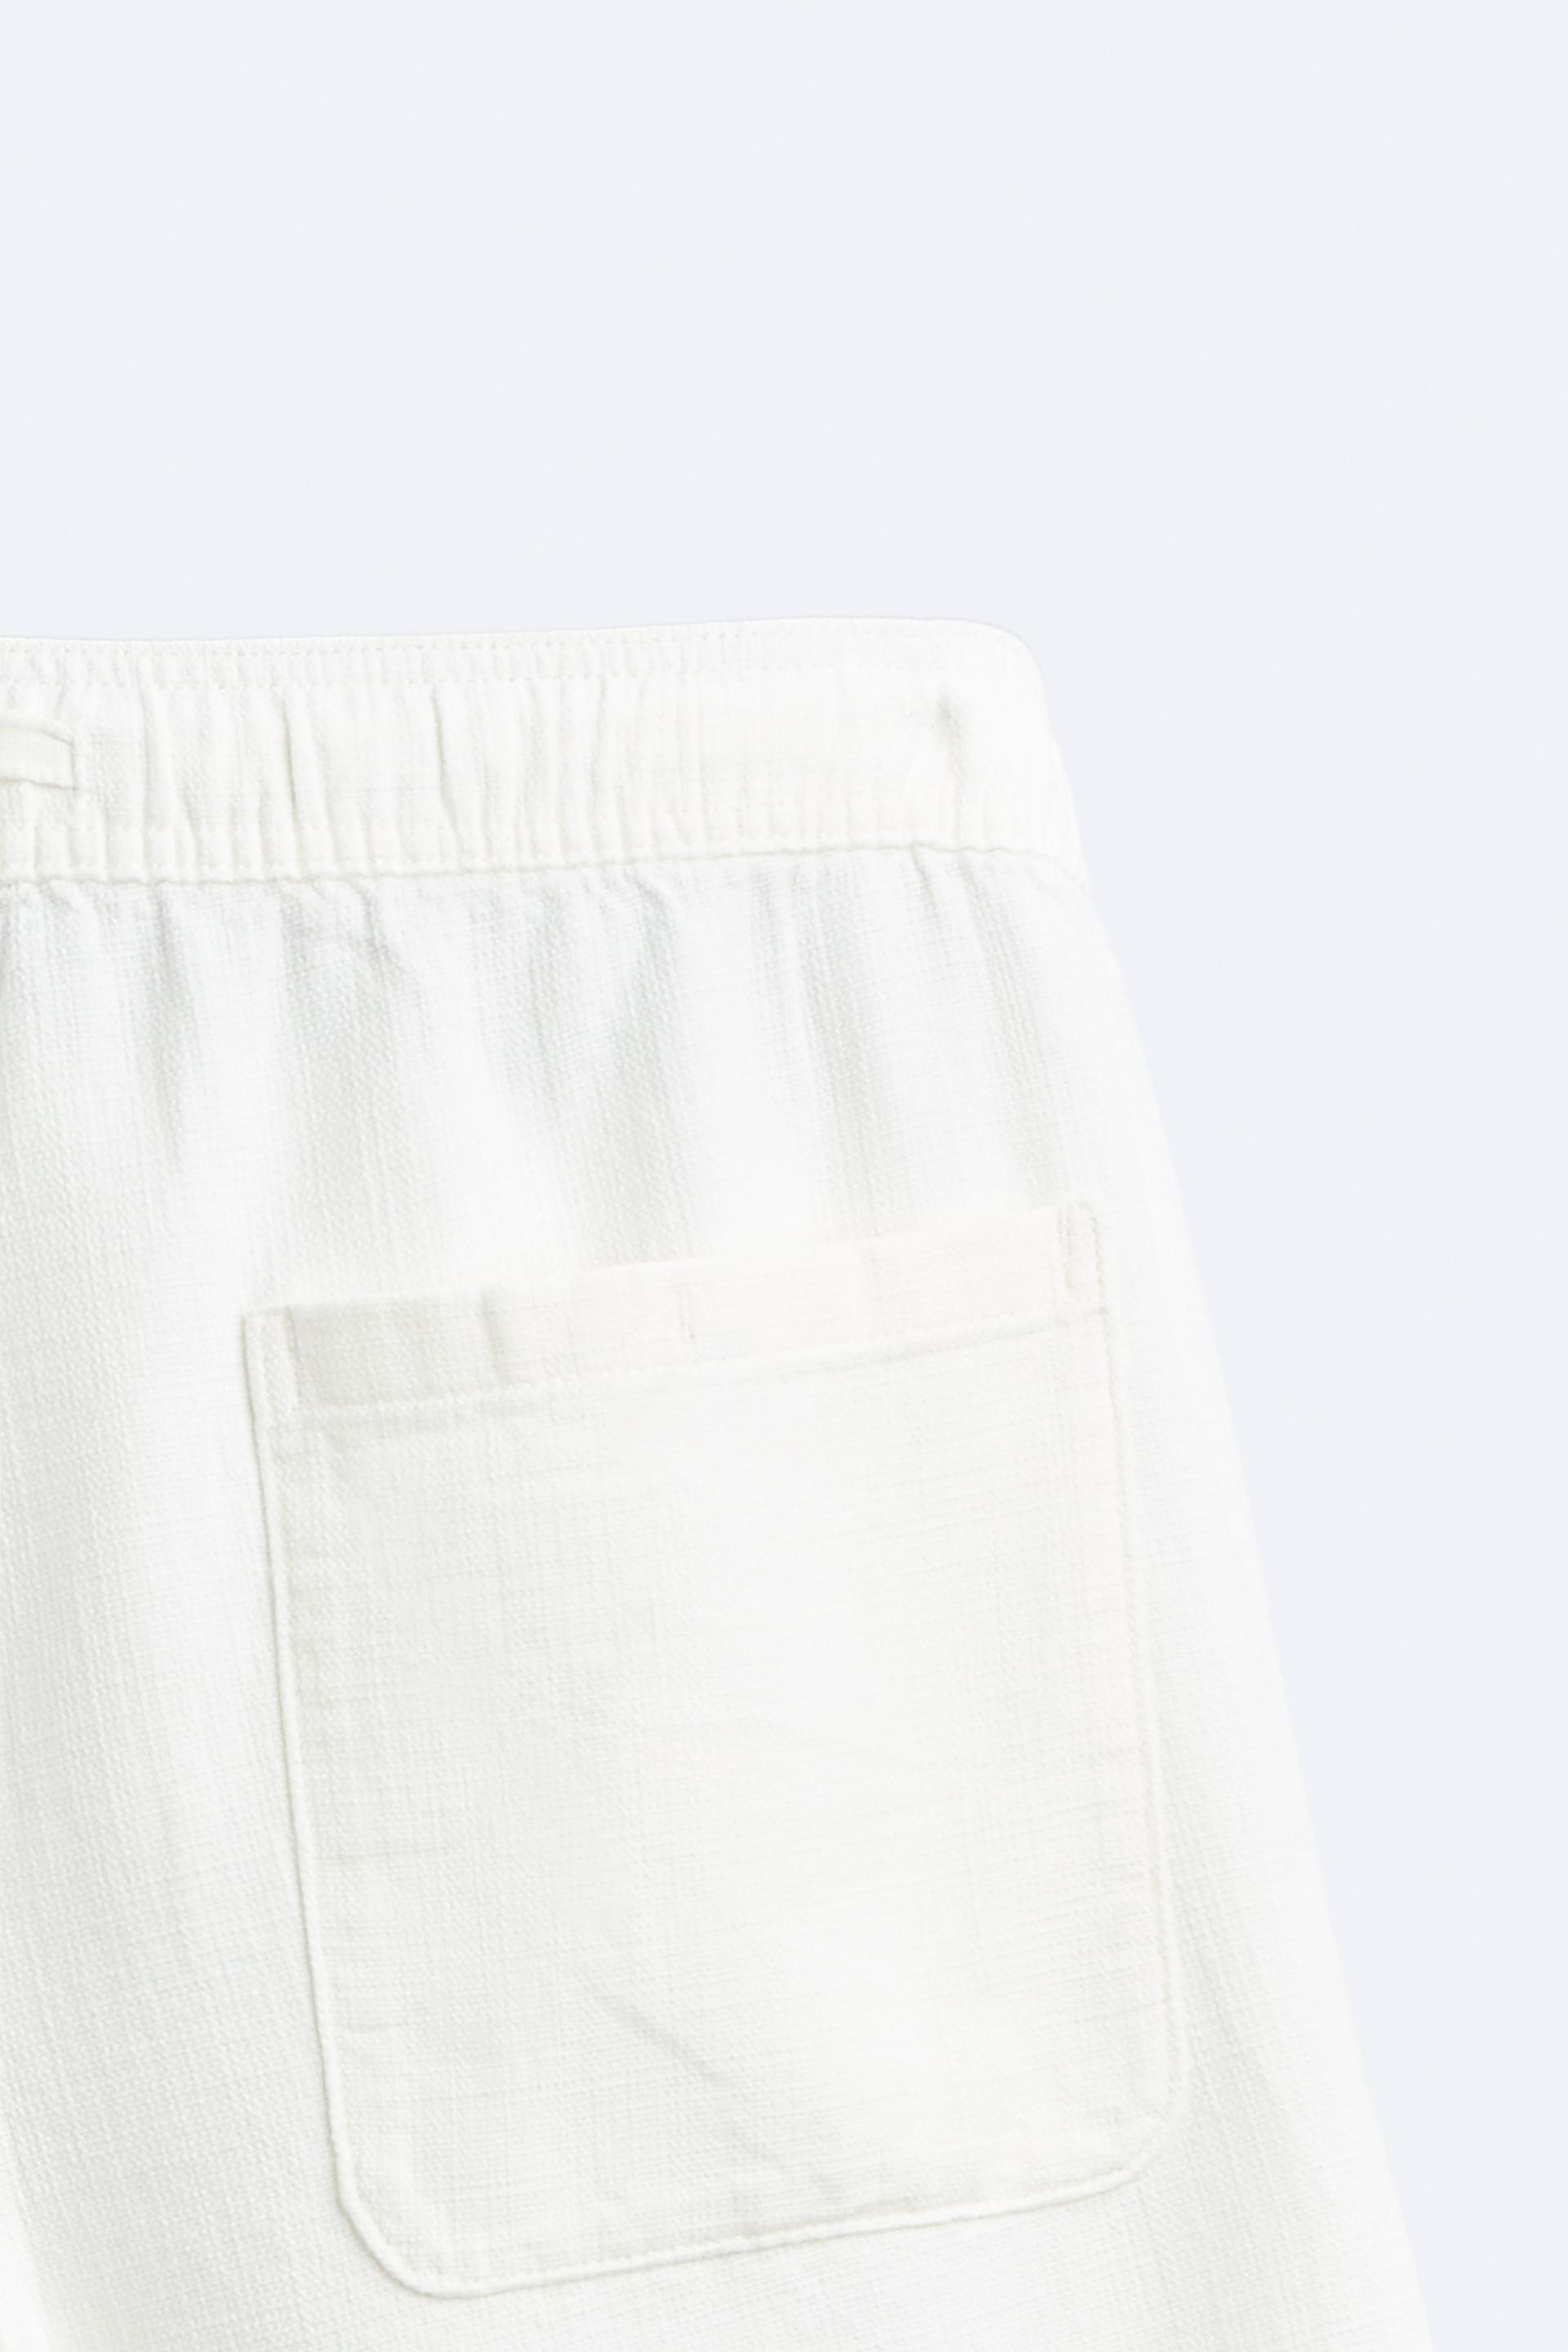 TEXTURED COTTON SHORTS - Oyster-white